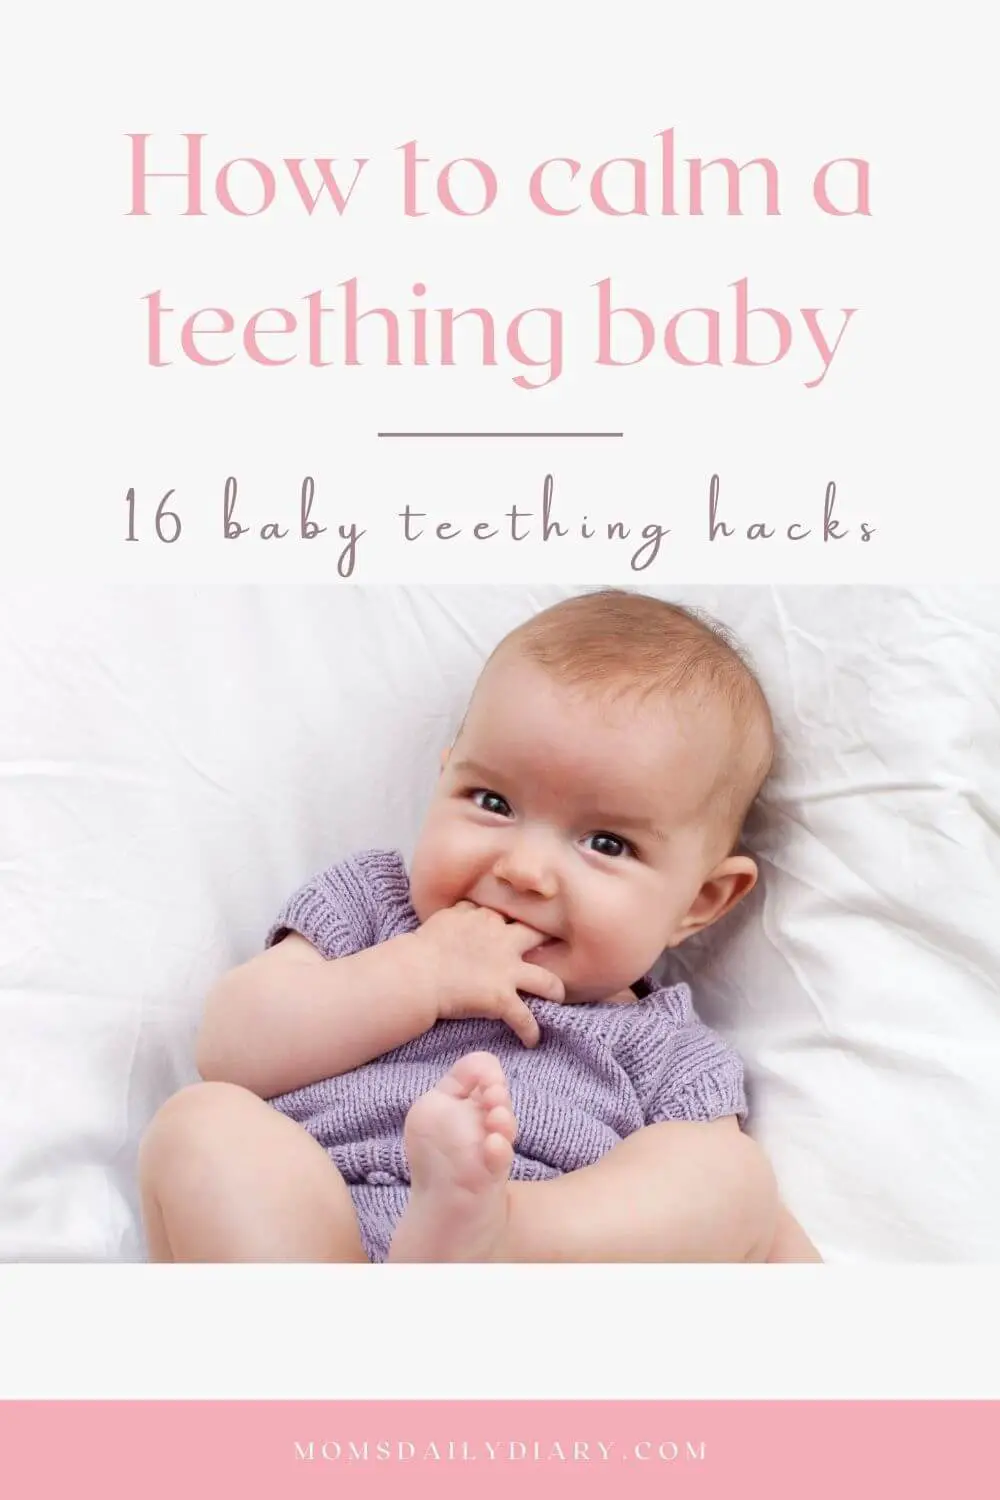 Pinterest pin with text "How to calm a teething baby. 16 baby teething hacks" and an image of a baby biting her hand. 